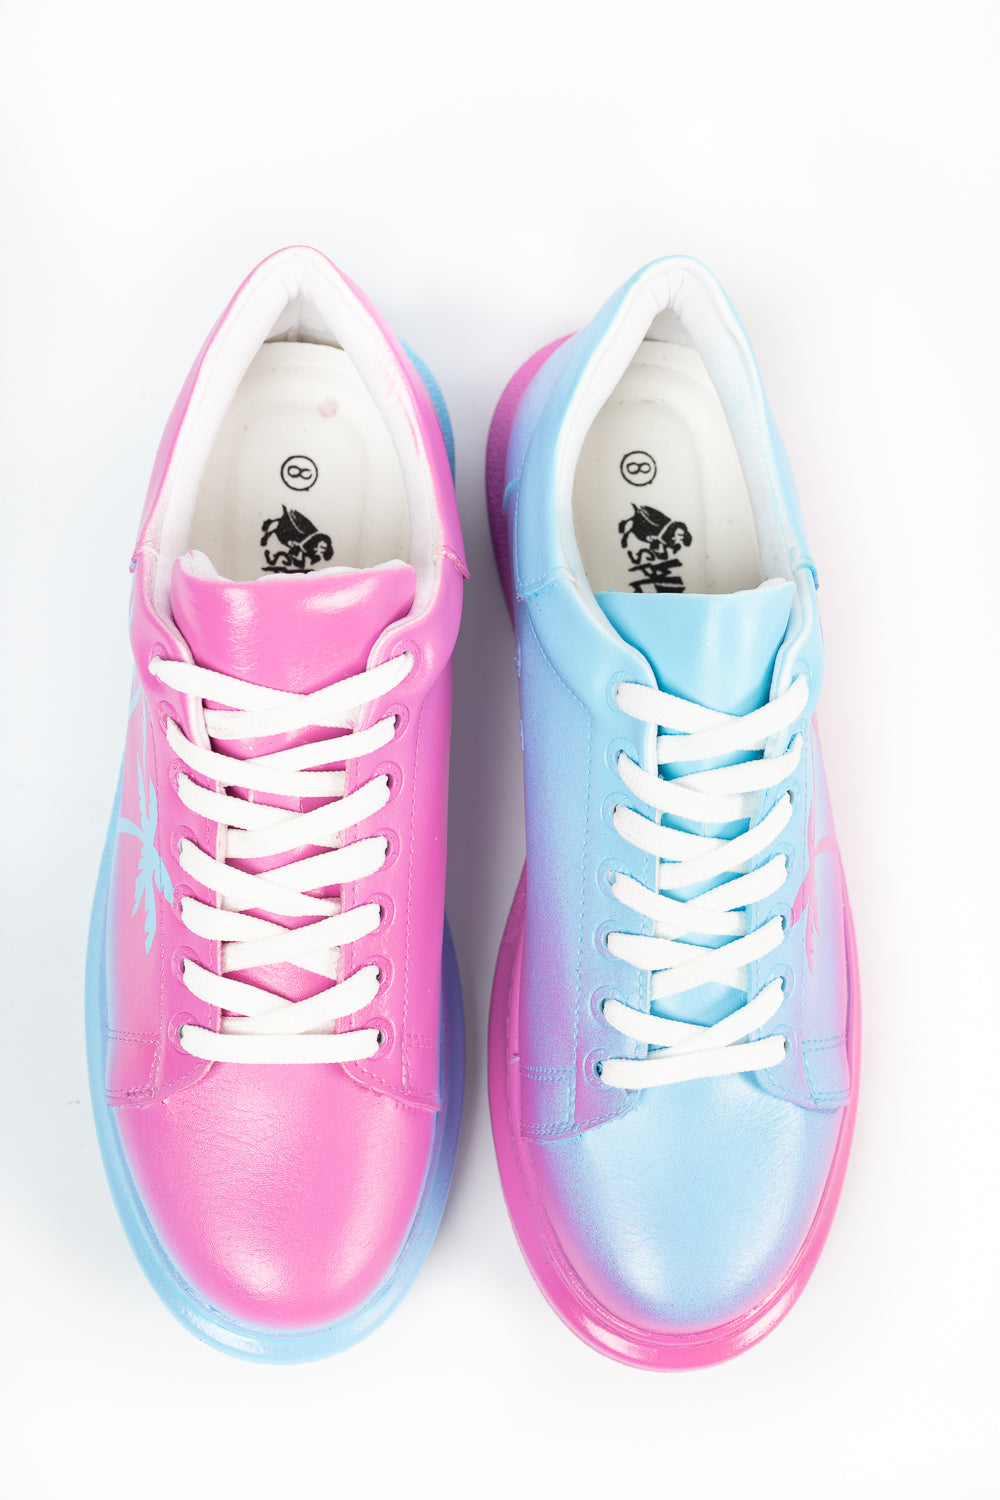 Palm Pink & Blue - Swagg Splash Sneakers